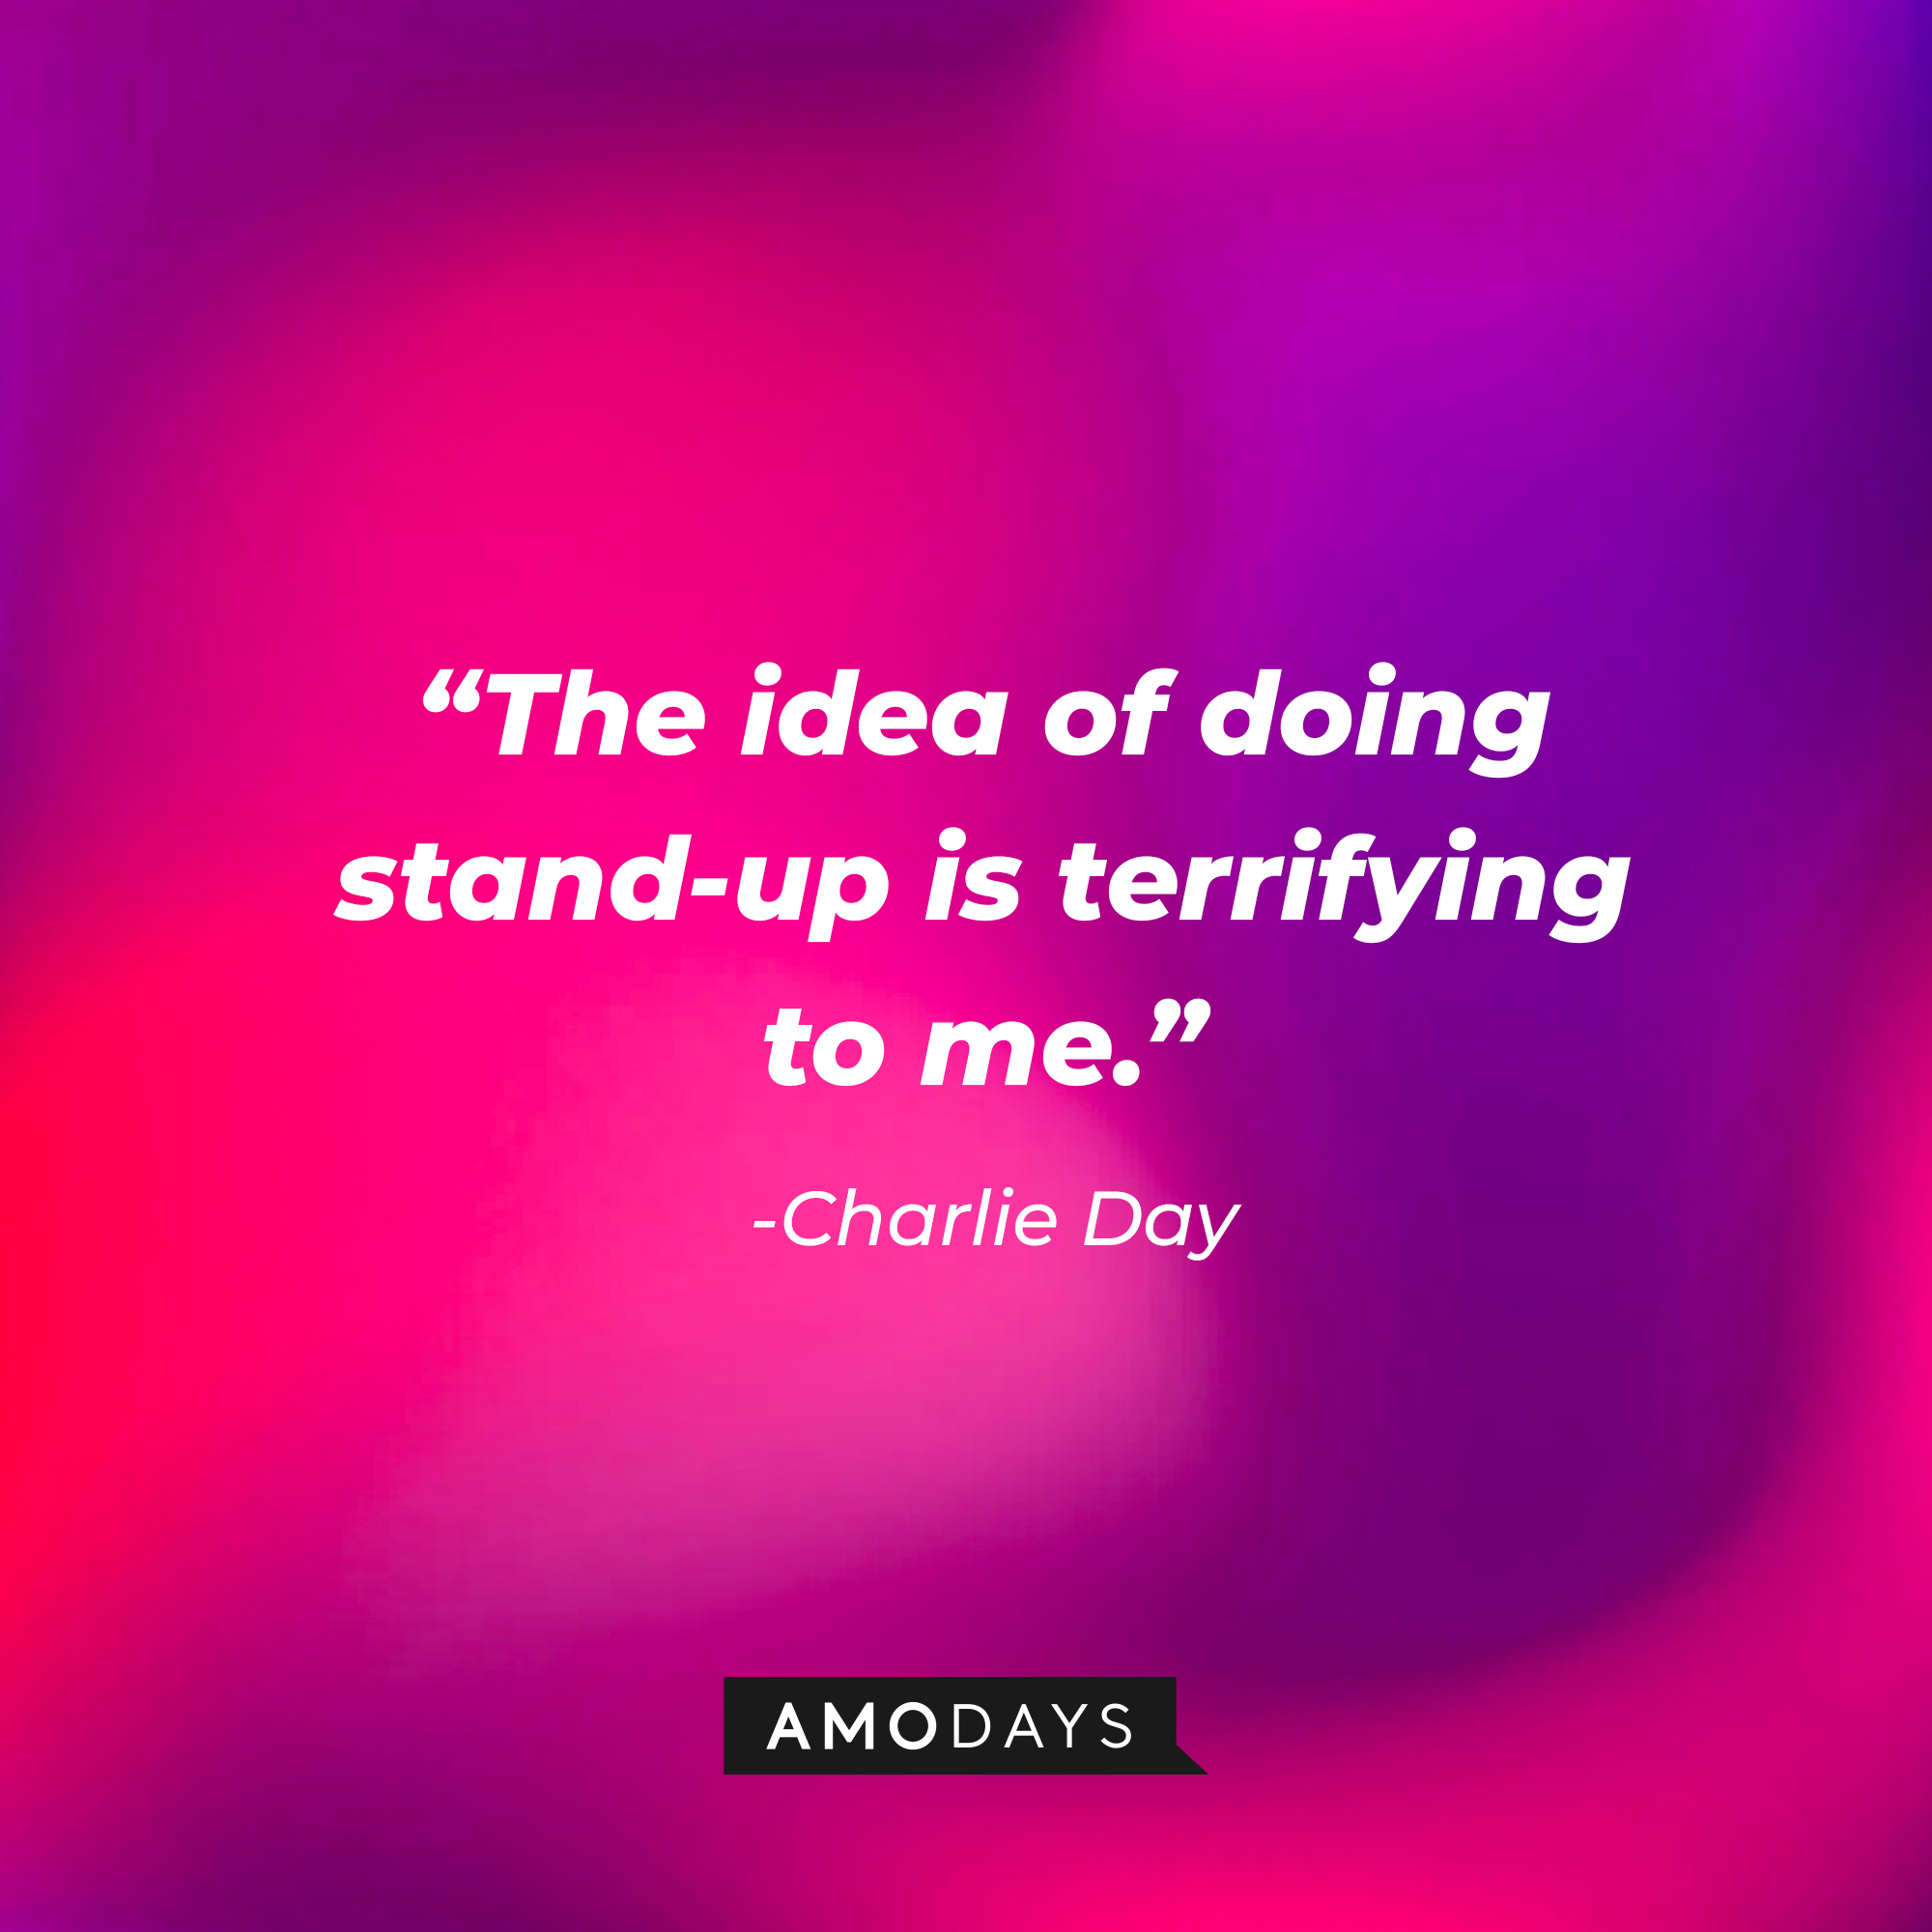 Charlie Day’s quote: “The idea of doing stand-up is terrifying to me.” | Source: AmoDays